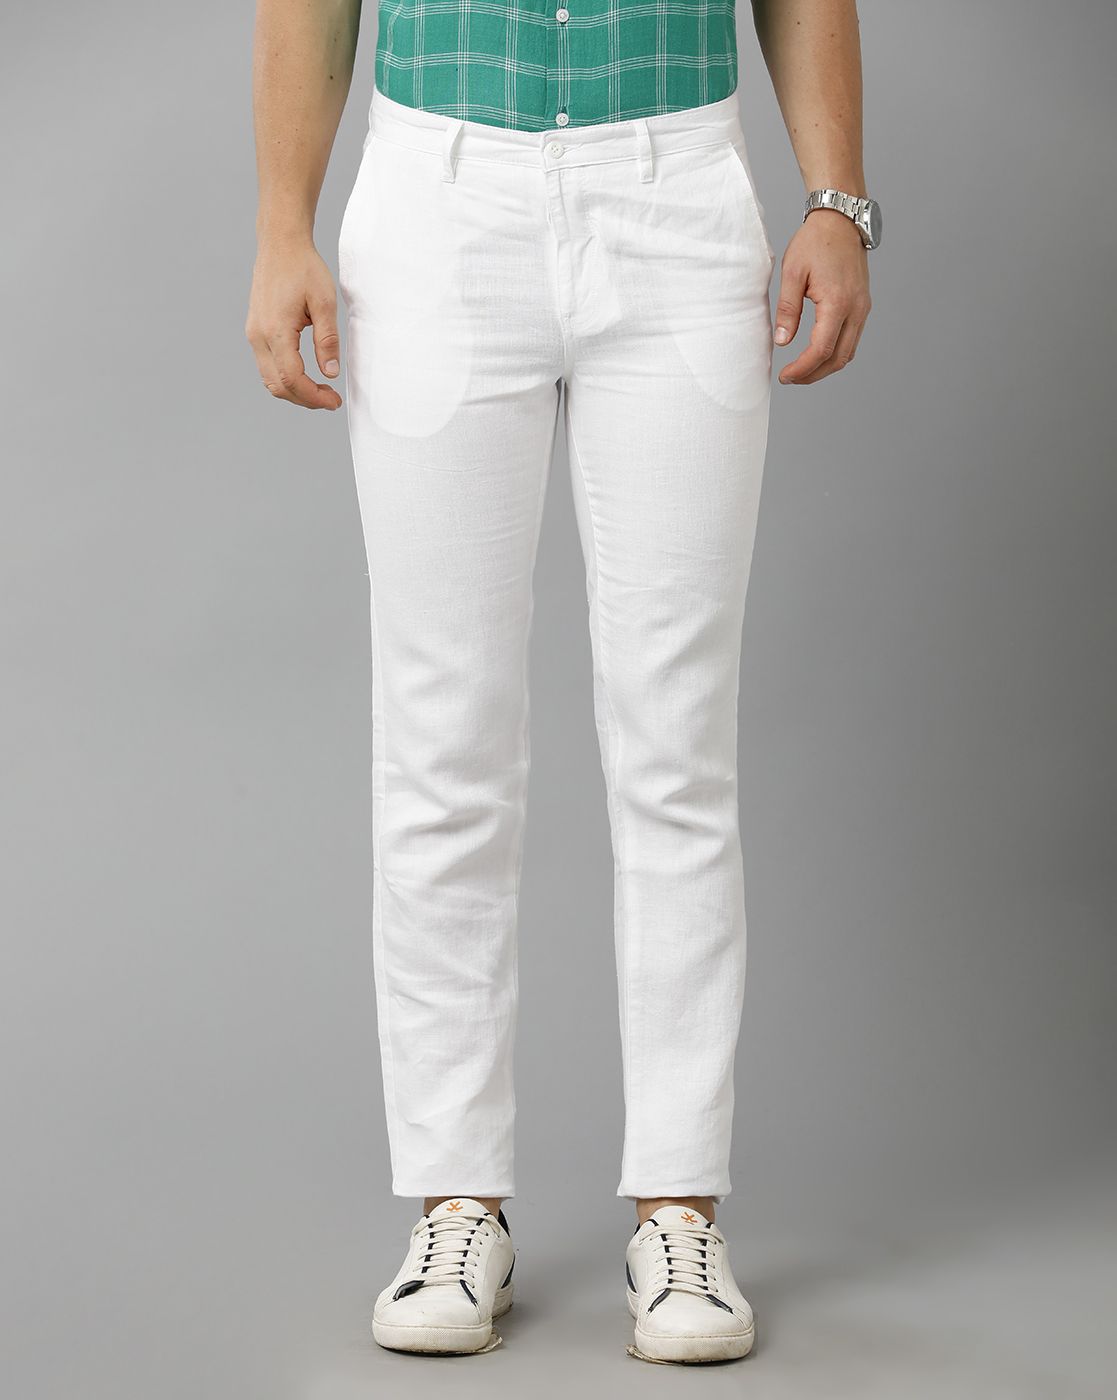 Linen Trousers at CareOfCarl.com